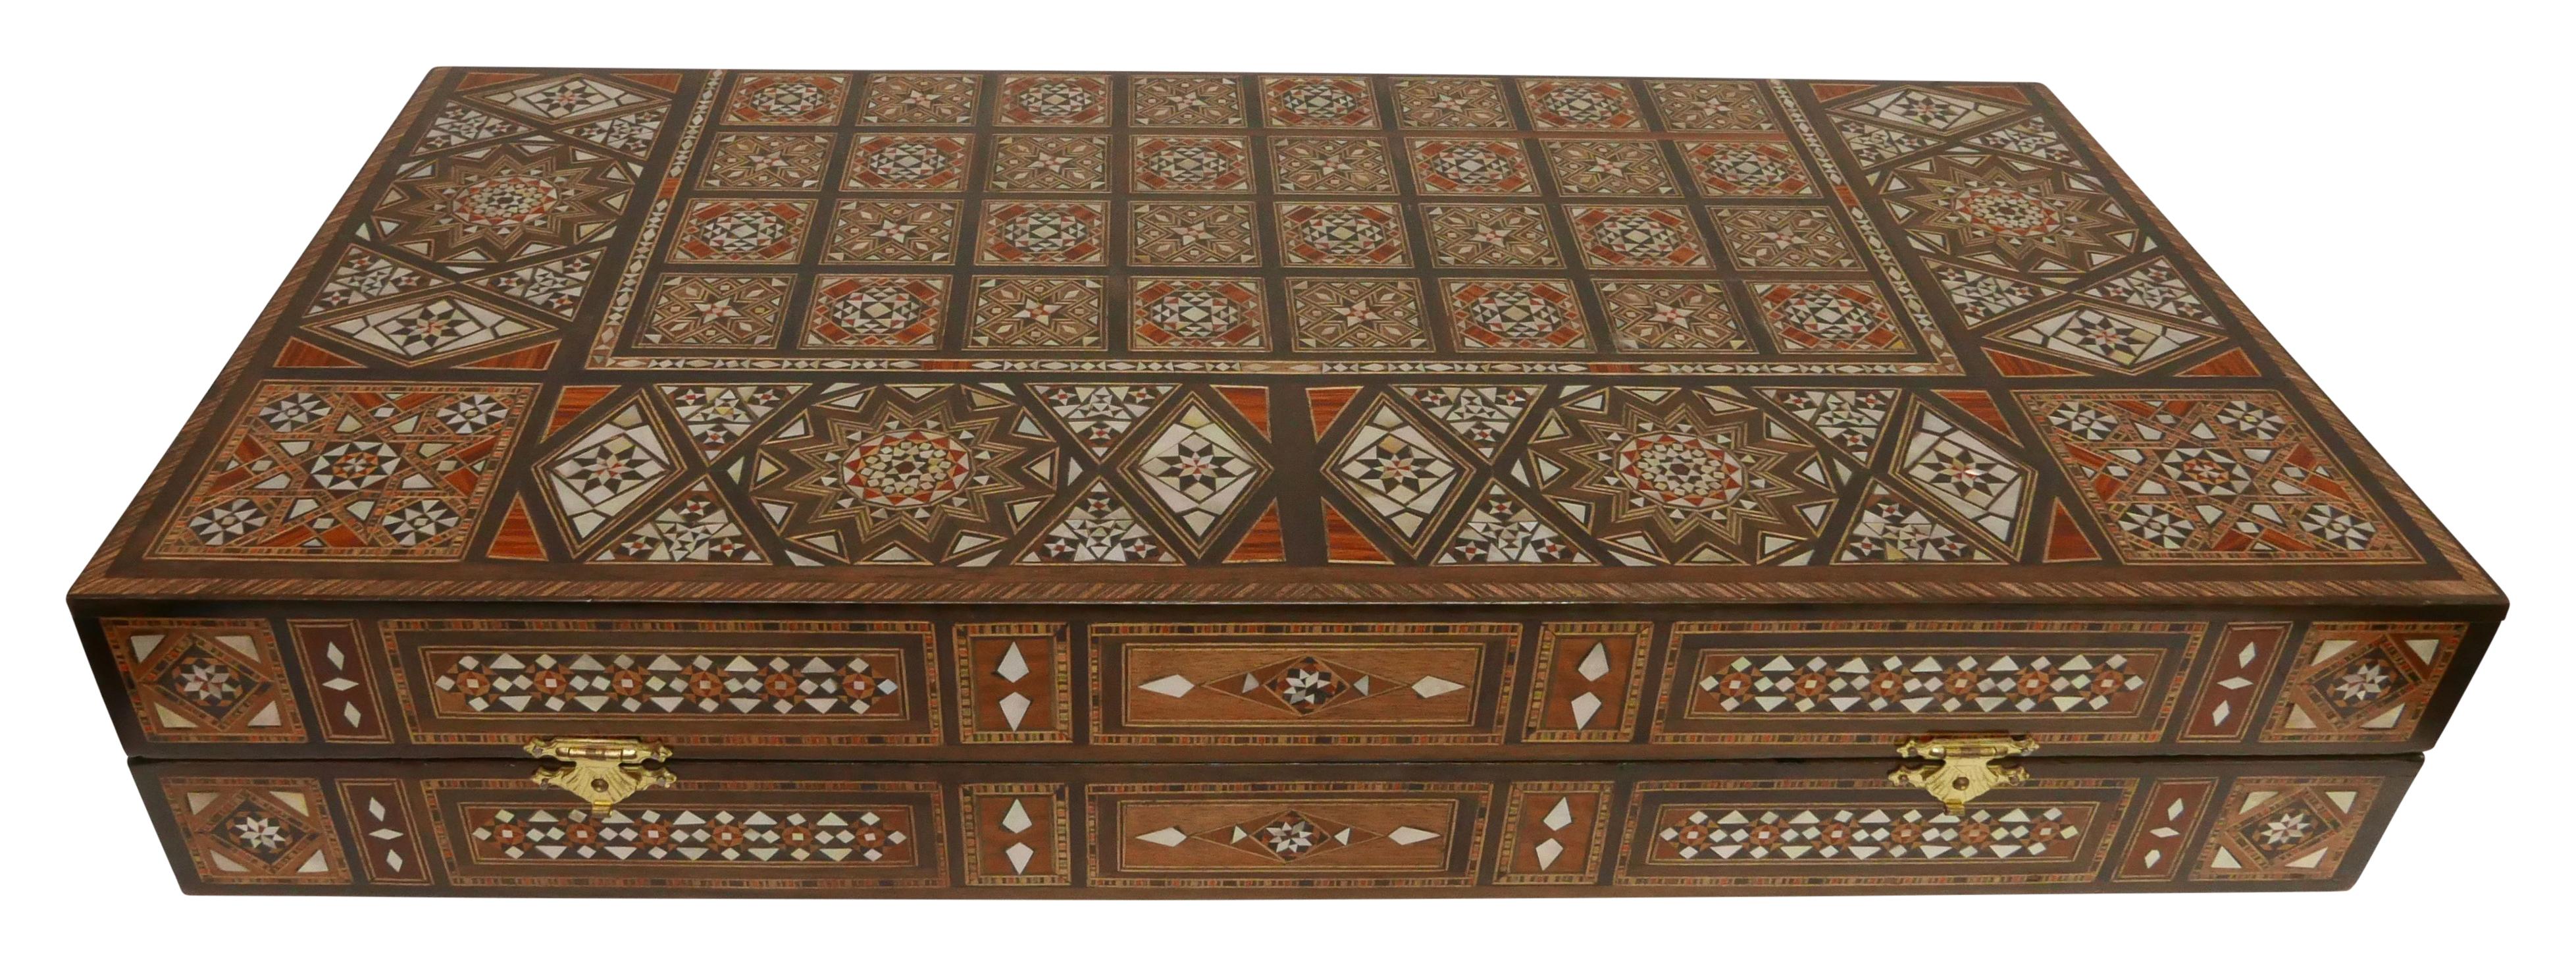 Mother-of-Pearl Syrian Inlaid Marquetry Mosaic Backgammon and Chess Game Box